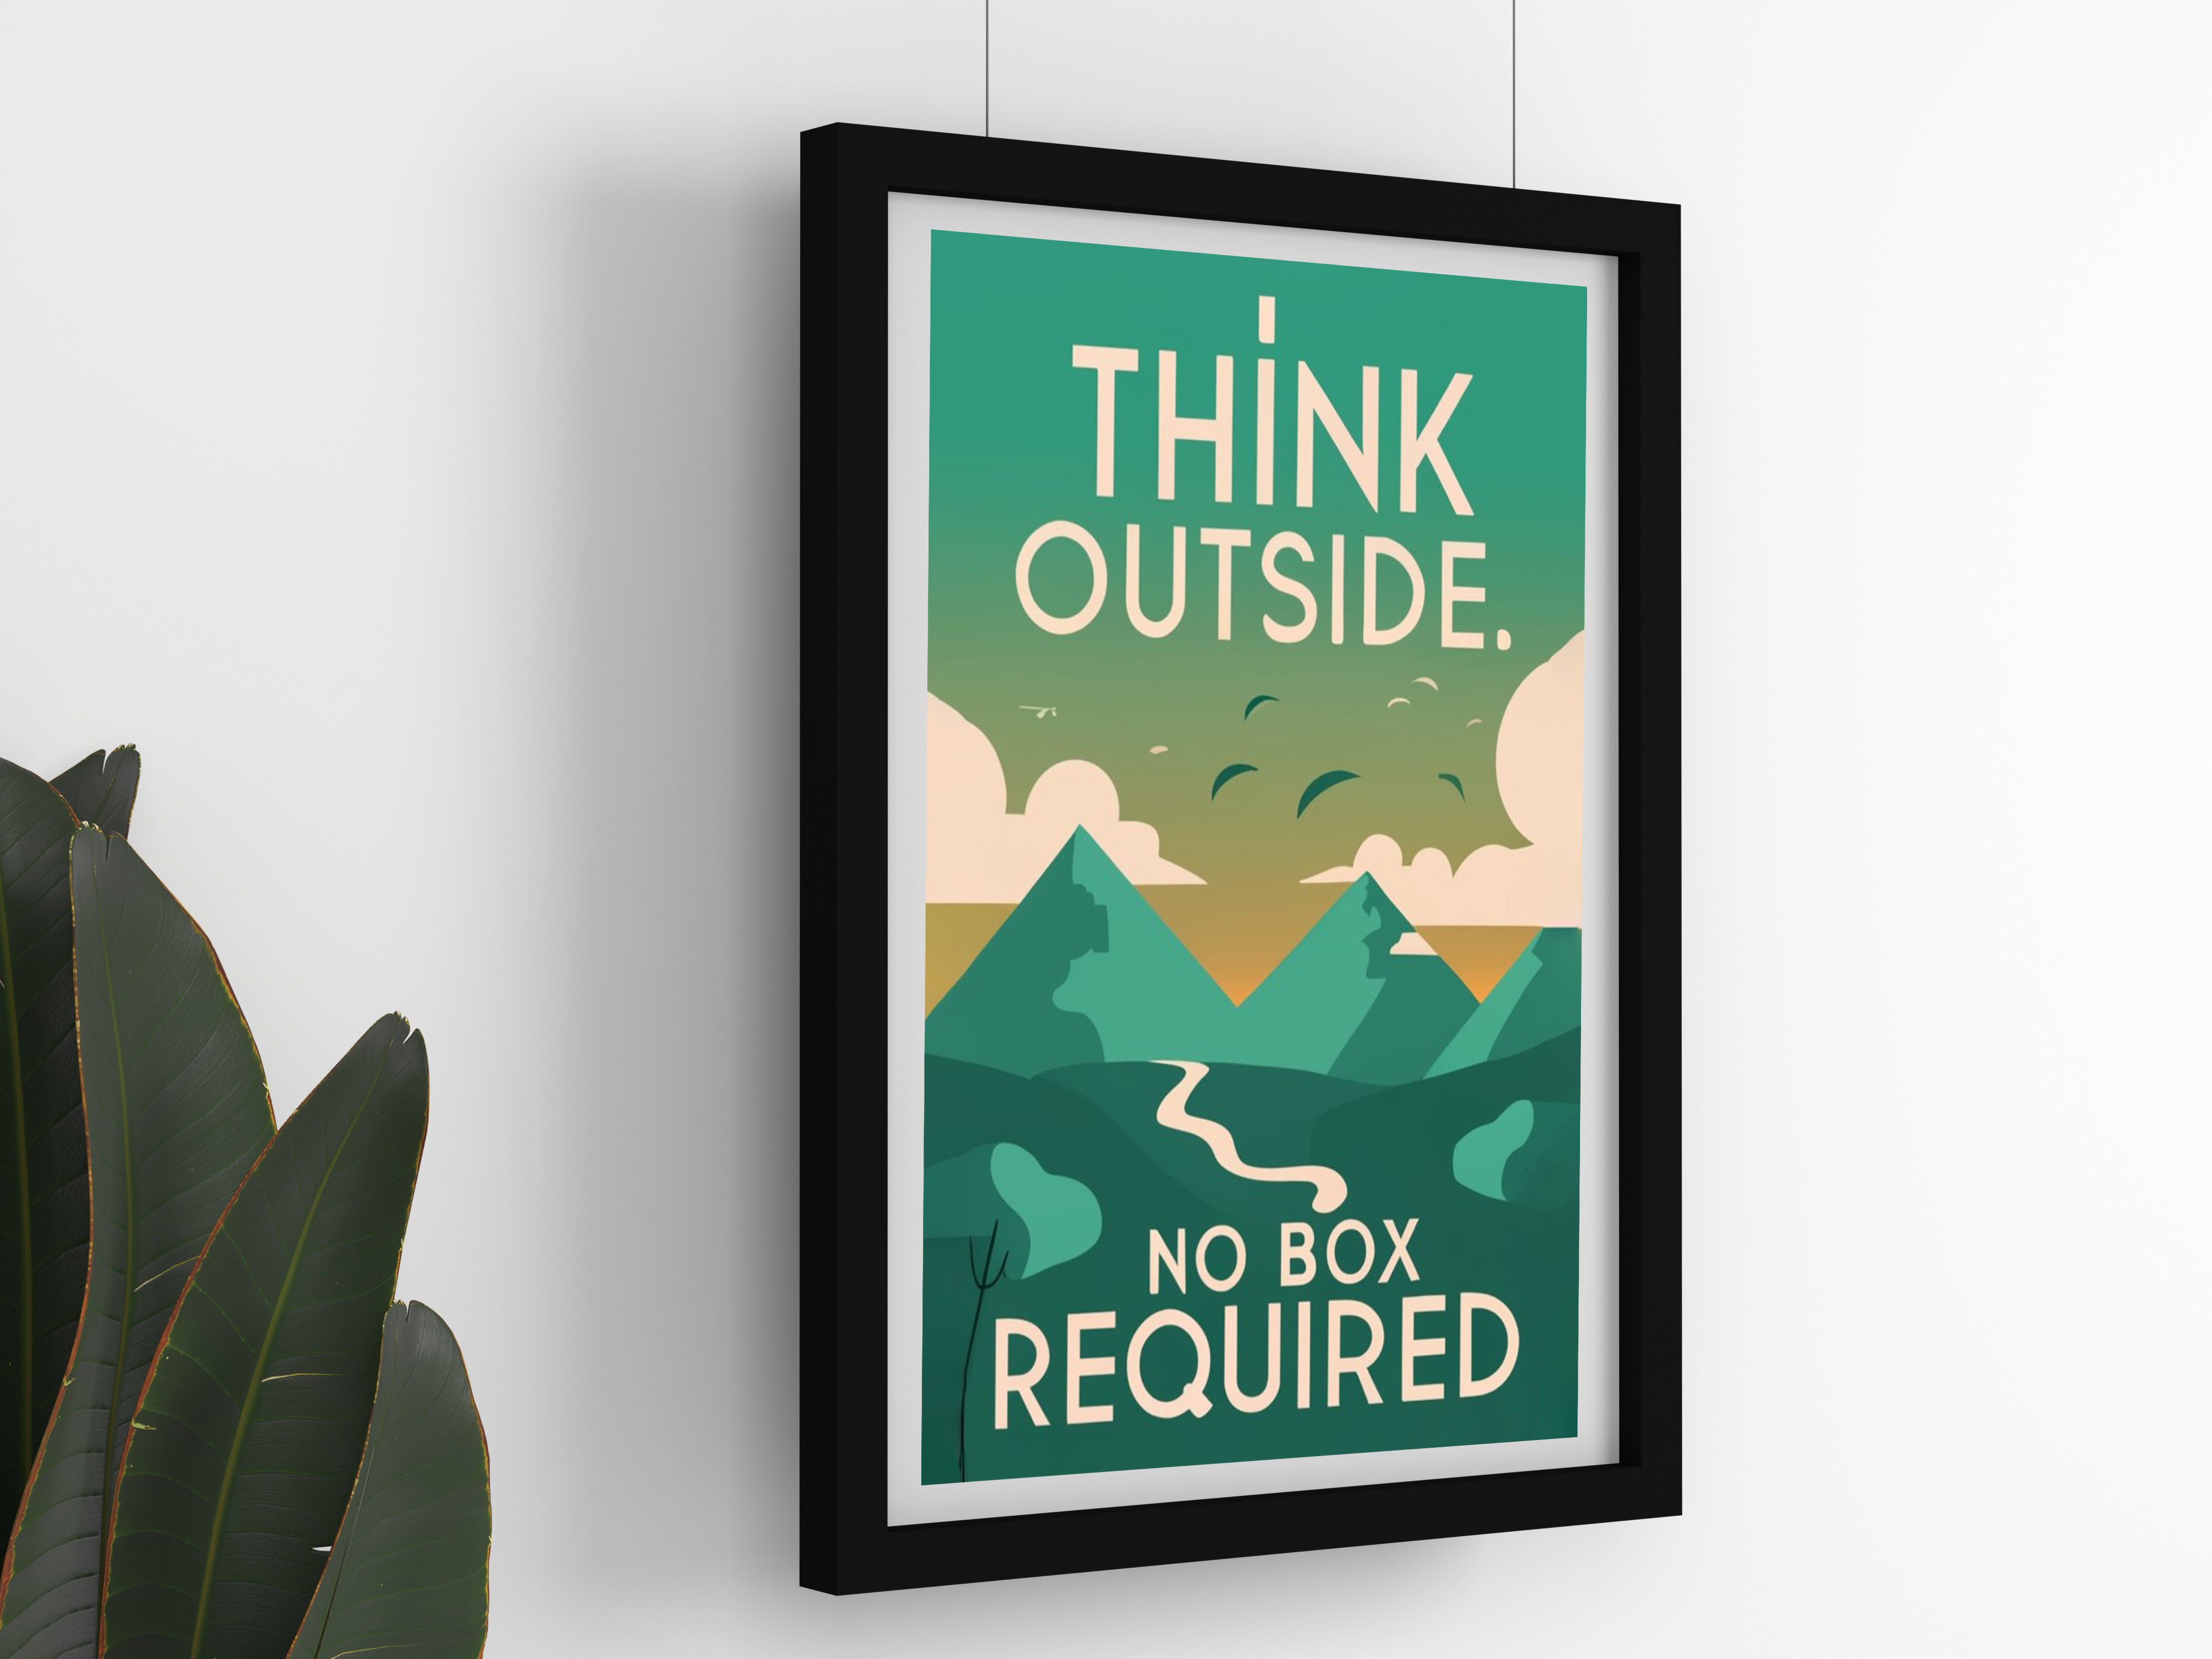 Unbox Your Brain Power with Quirky Poster